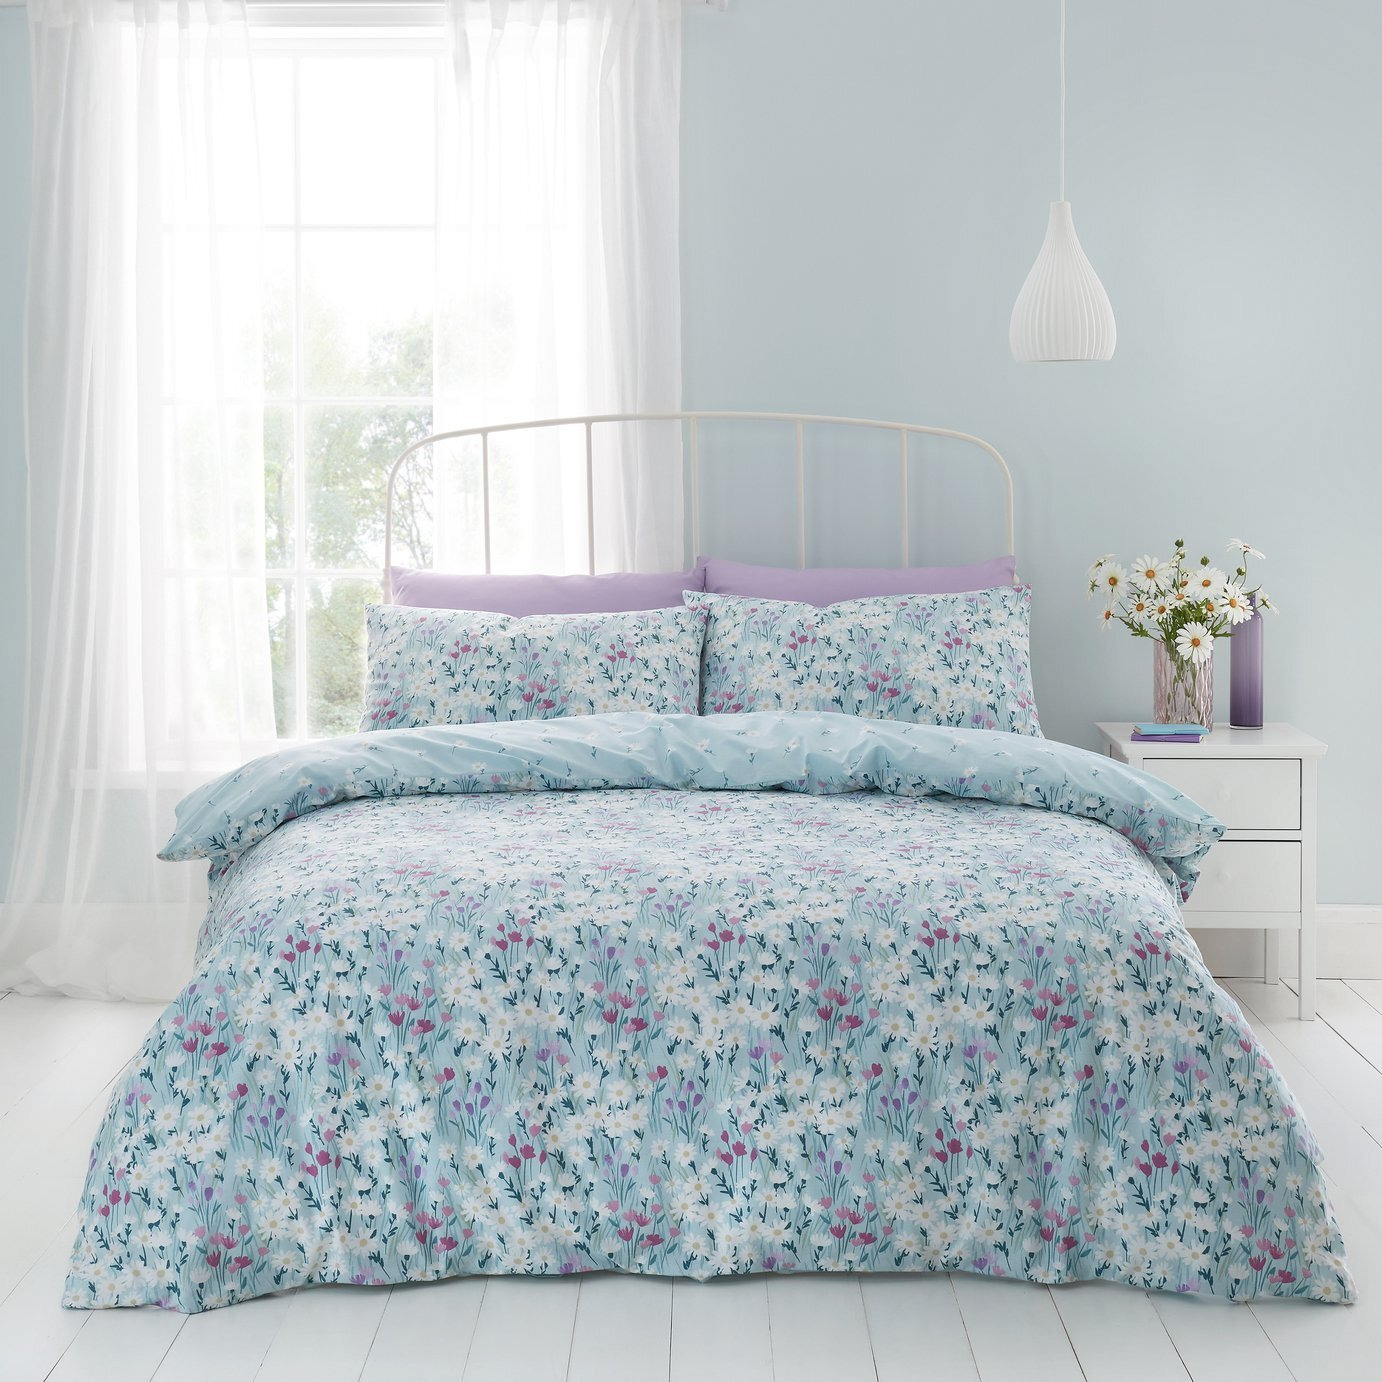 Catherine Lansfield Daisy Meadow Blue Bedding Set - Double - image 1